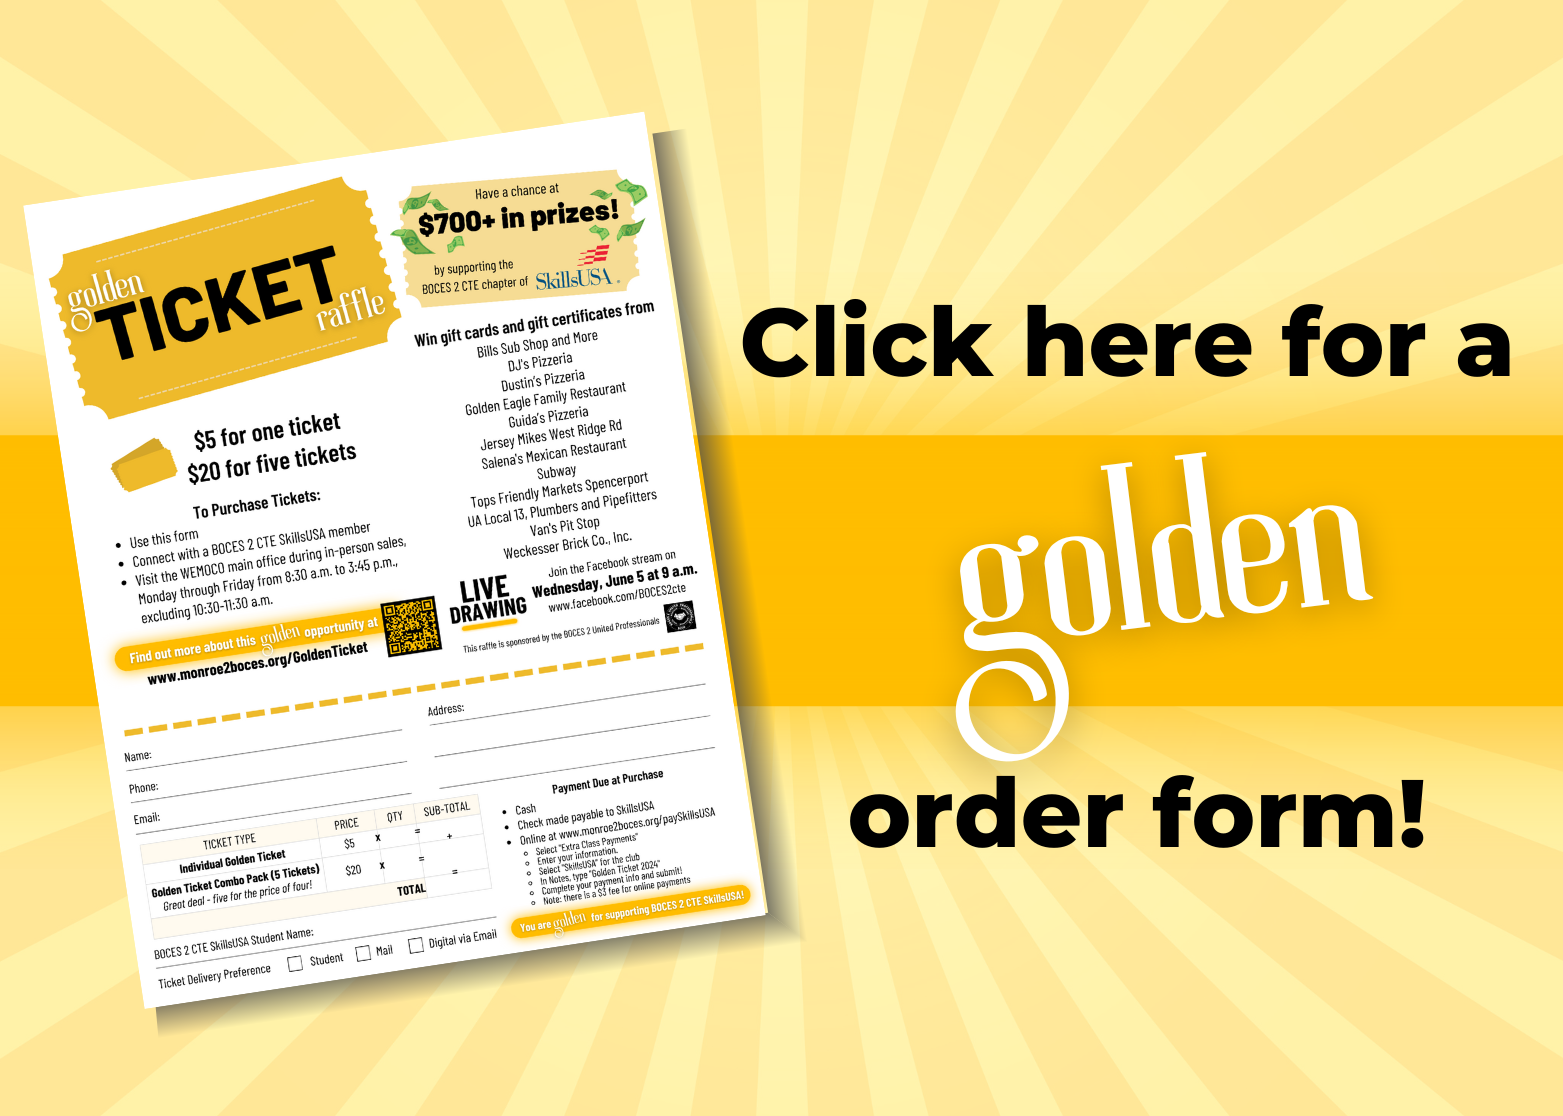 Click here for a Golden Ticket Raffle order form